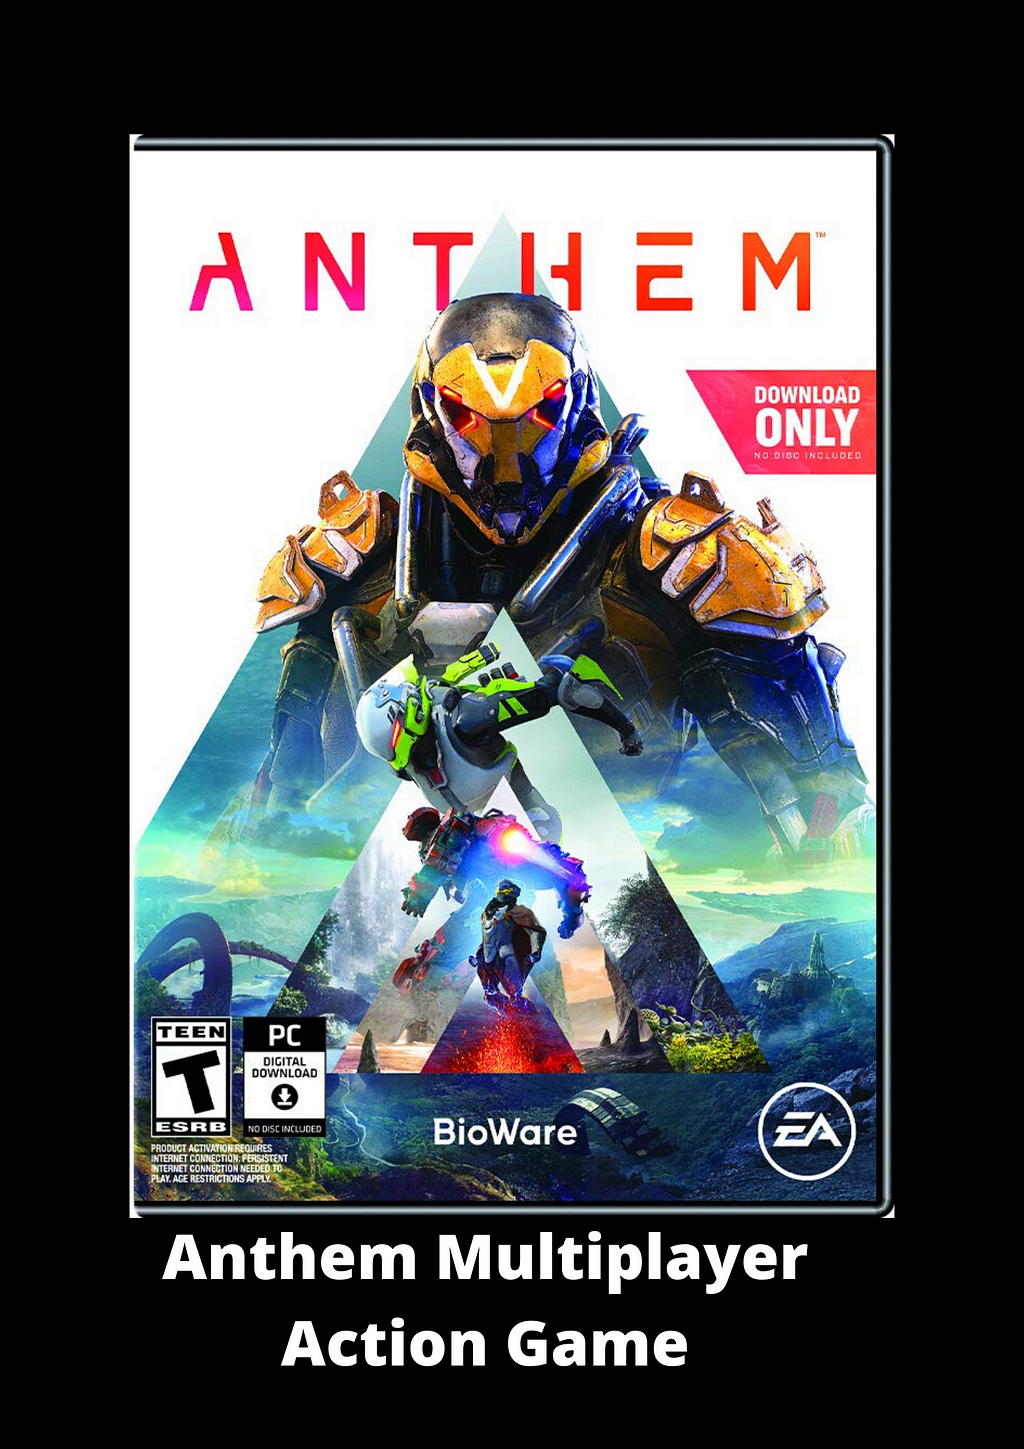 Anthem is an online multiplayer action role-playing video game developed by BioWare